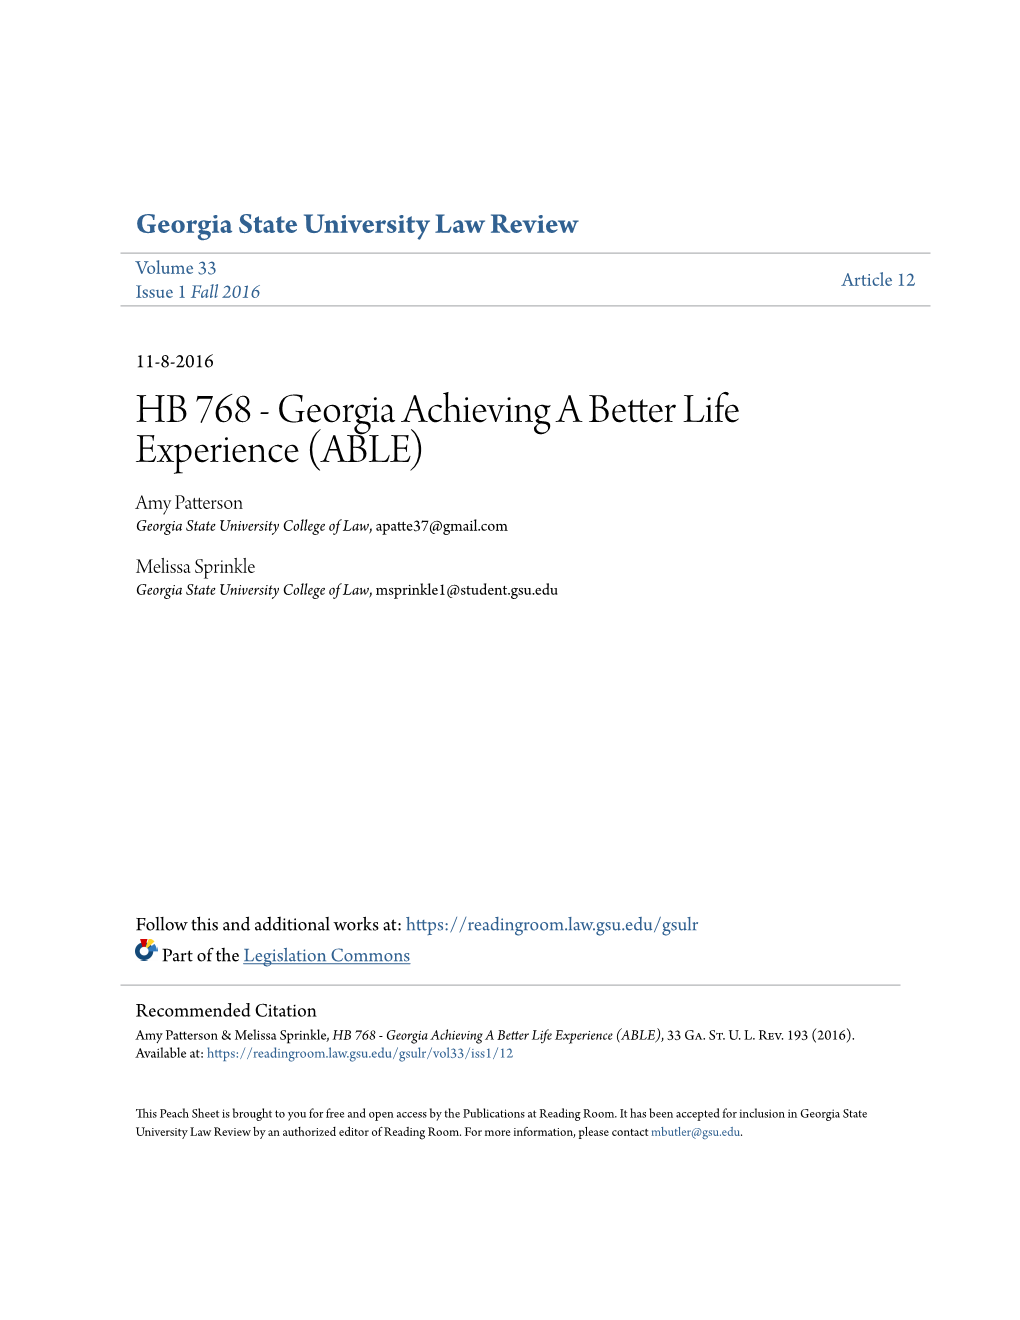 HB 768 - Georgia Achieving a Better Life Experience (ABLE) Amy Patterson Georgia State University College of Law, Apatte37@Gmail.Com